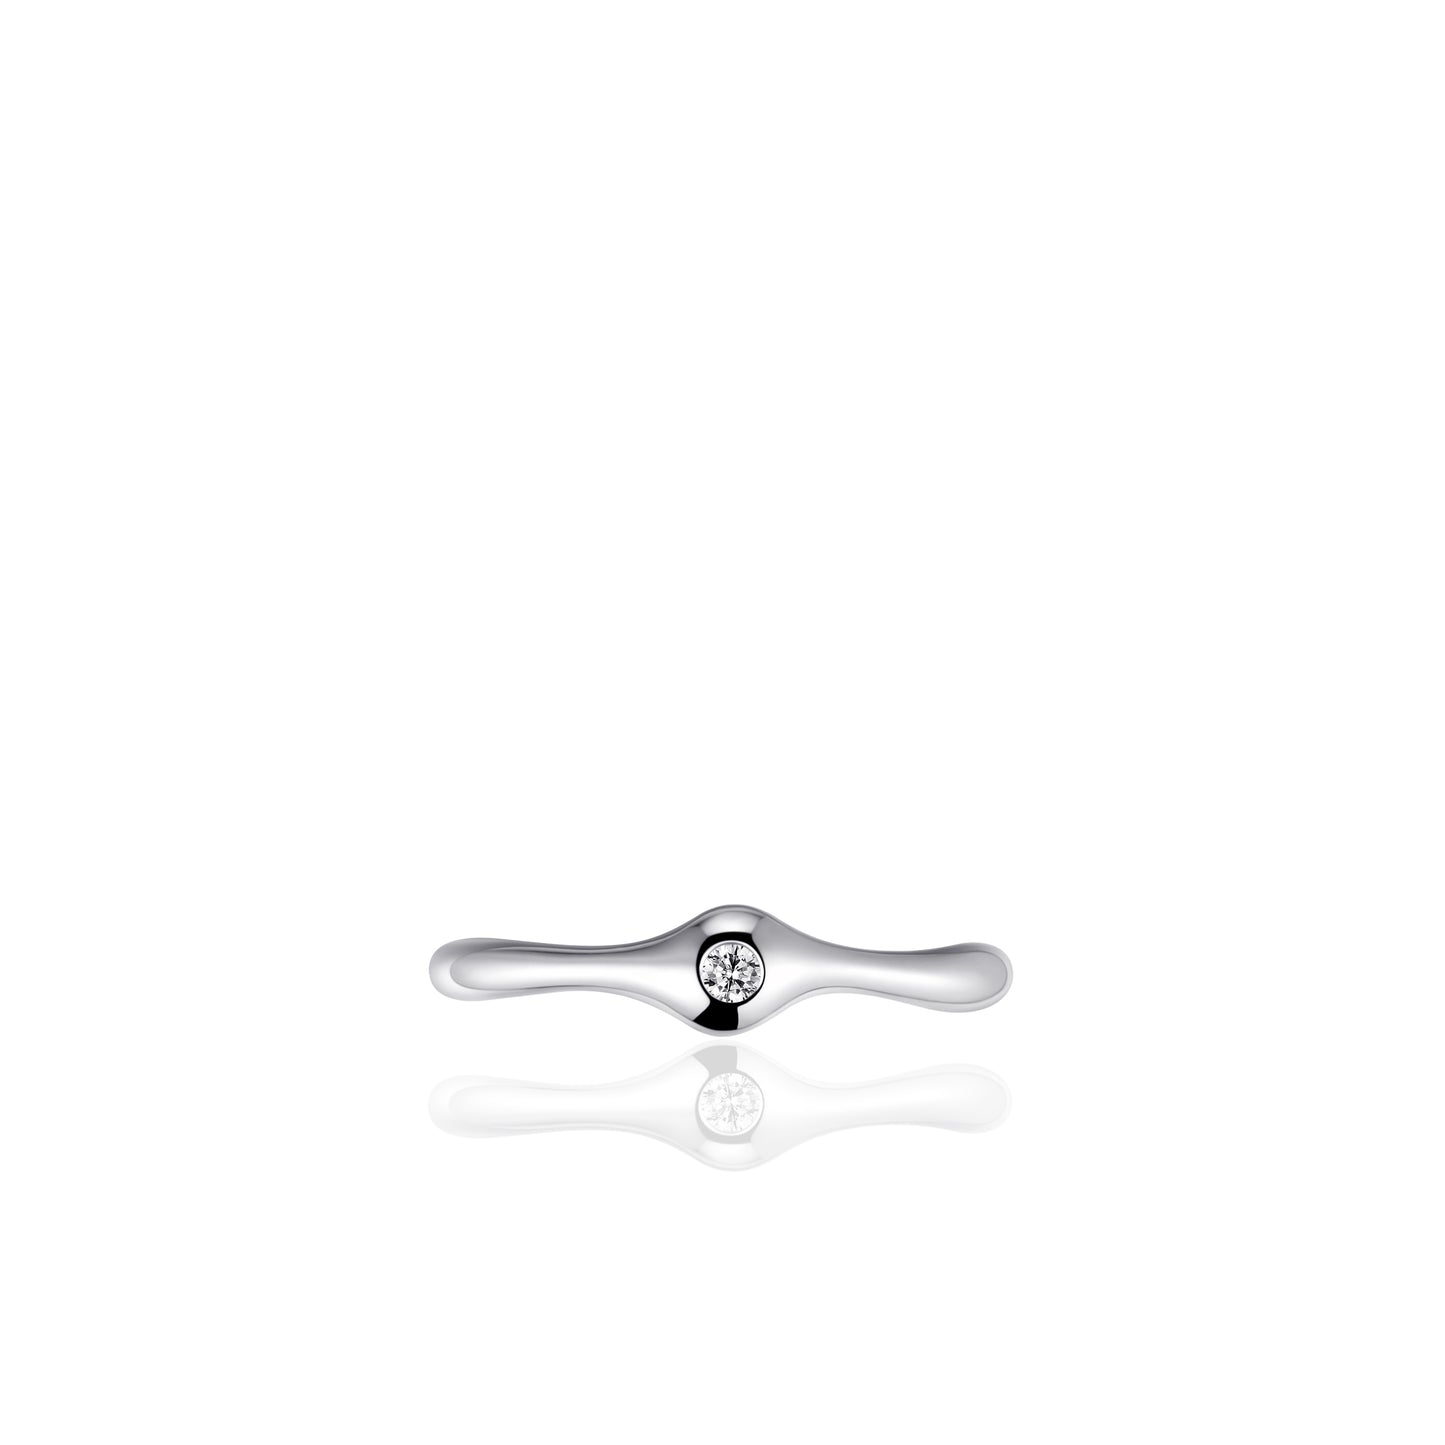 ORGANIC CZ Solitaire Ring - Silver - John Ross Jewellers